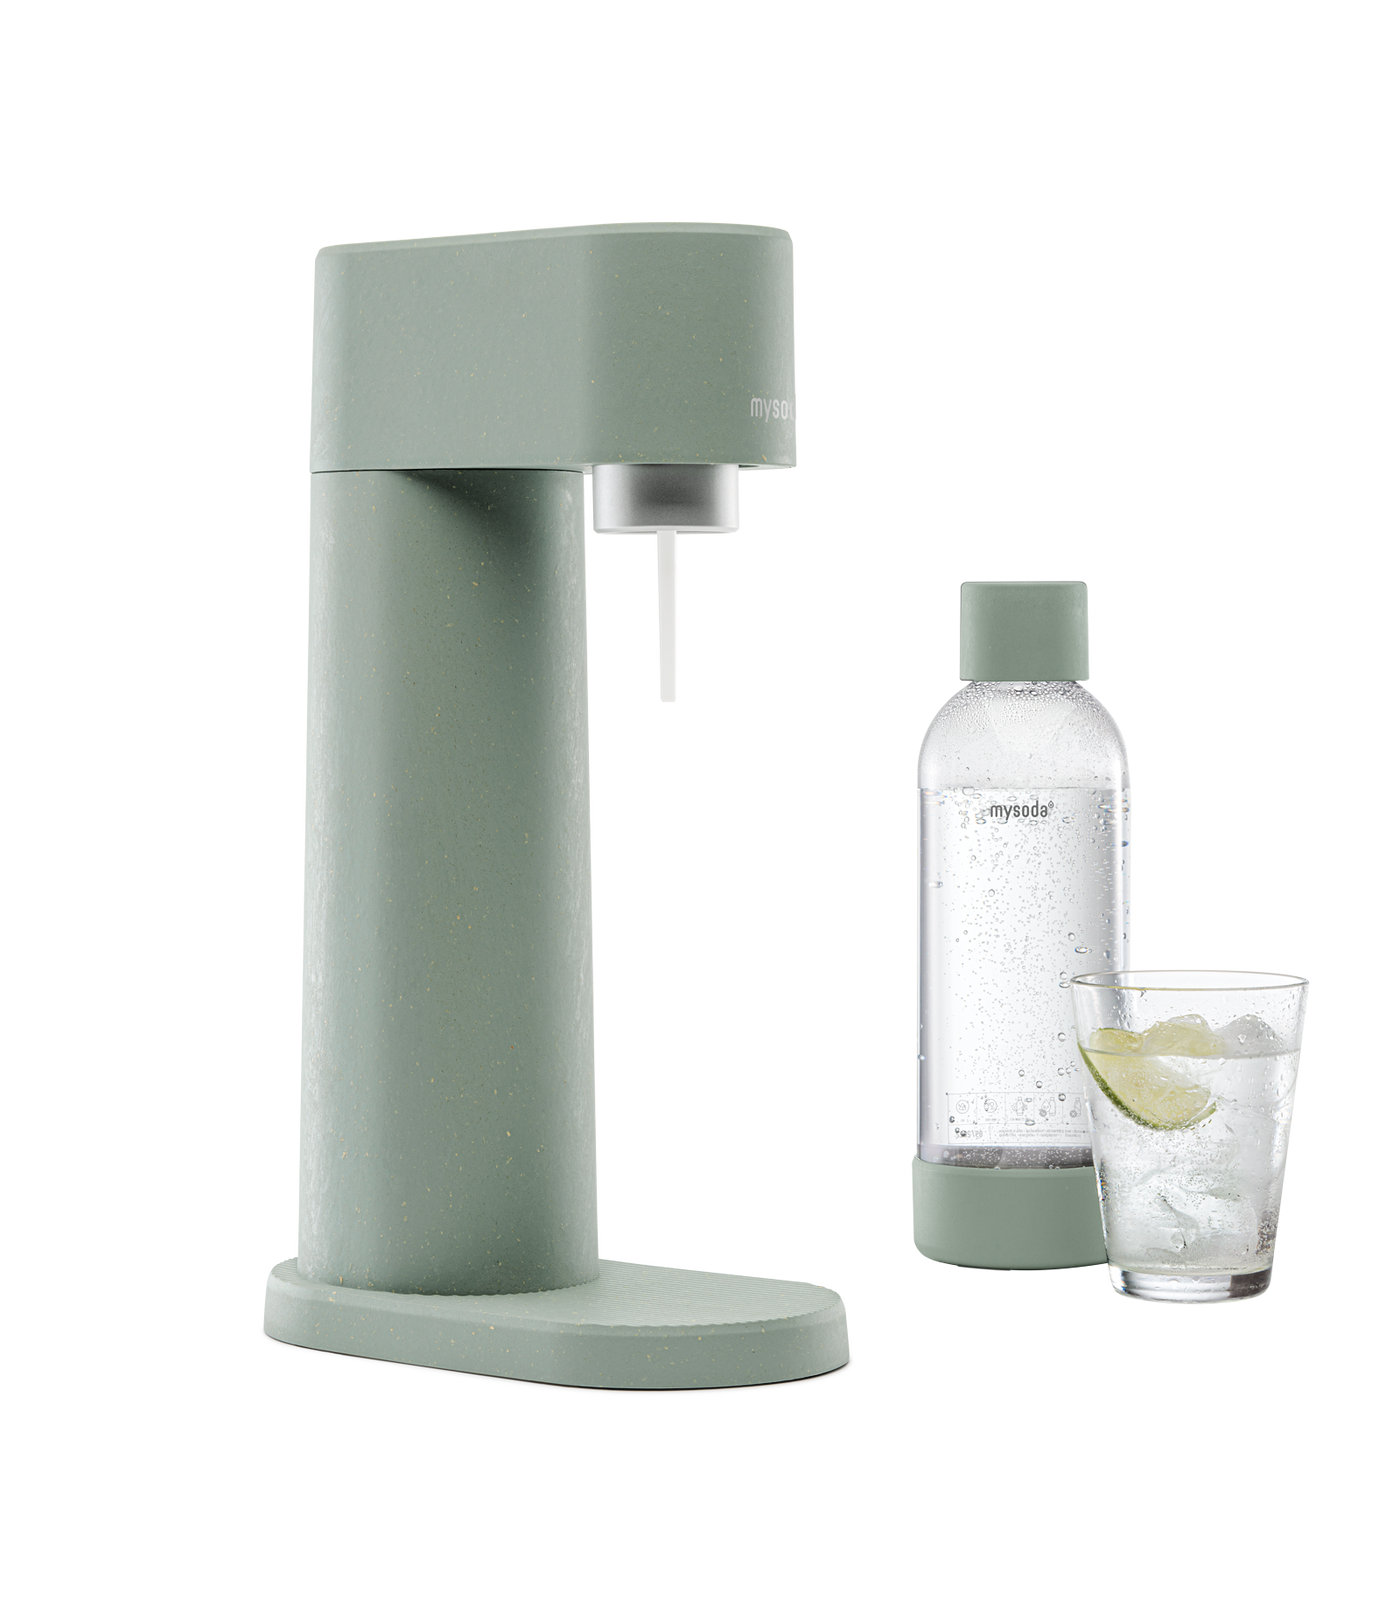 Pigeon Mysoda Woody sparkling water maker with bottle